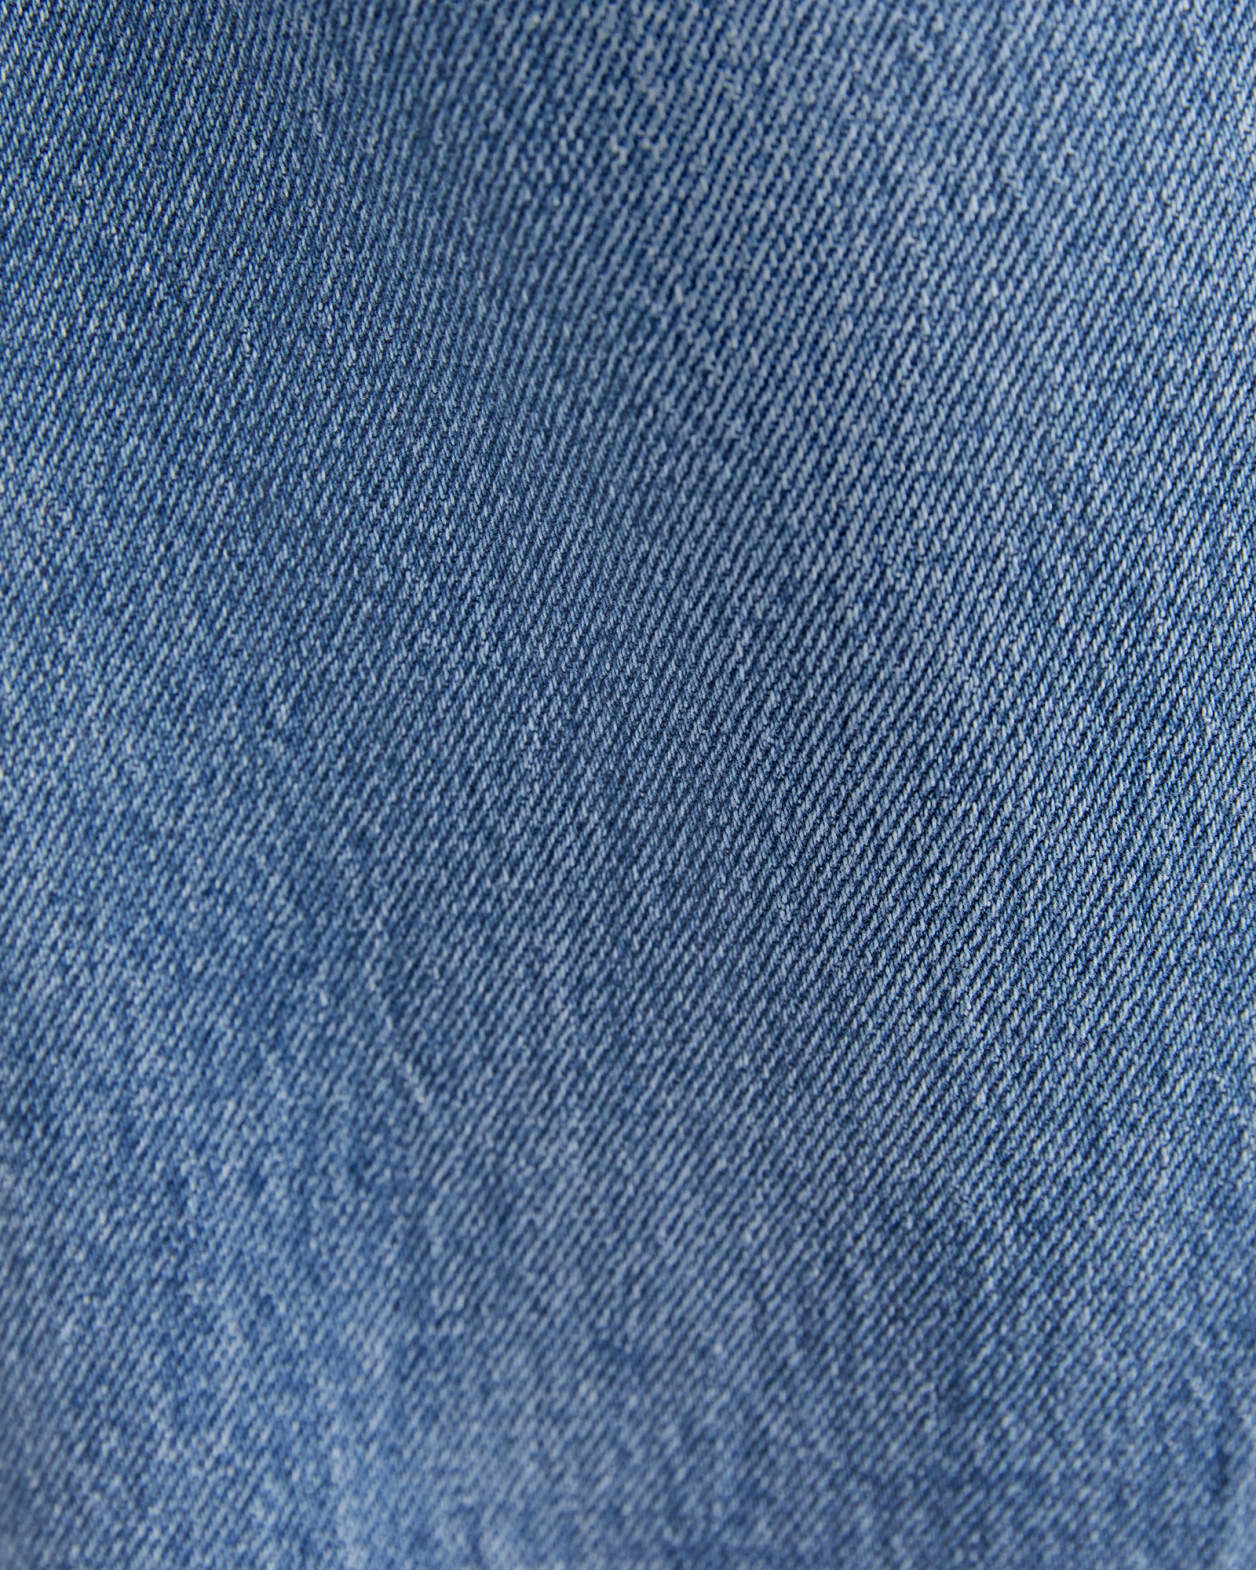 Flynn Straight Jeans in MID BLUE WASH